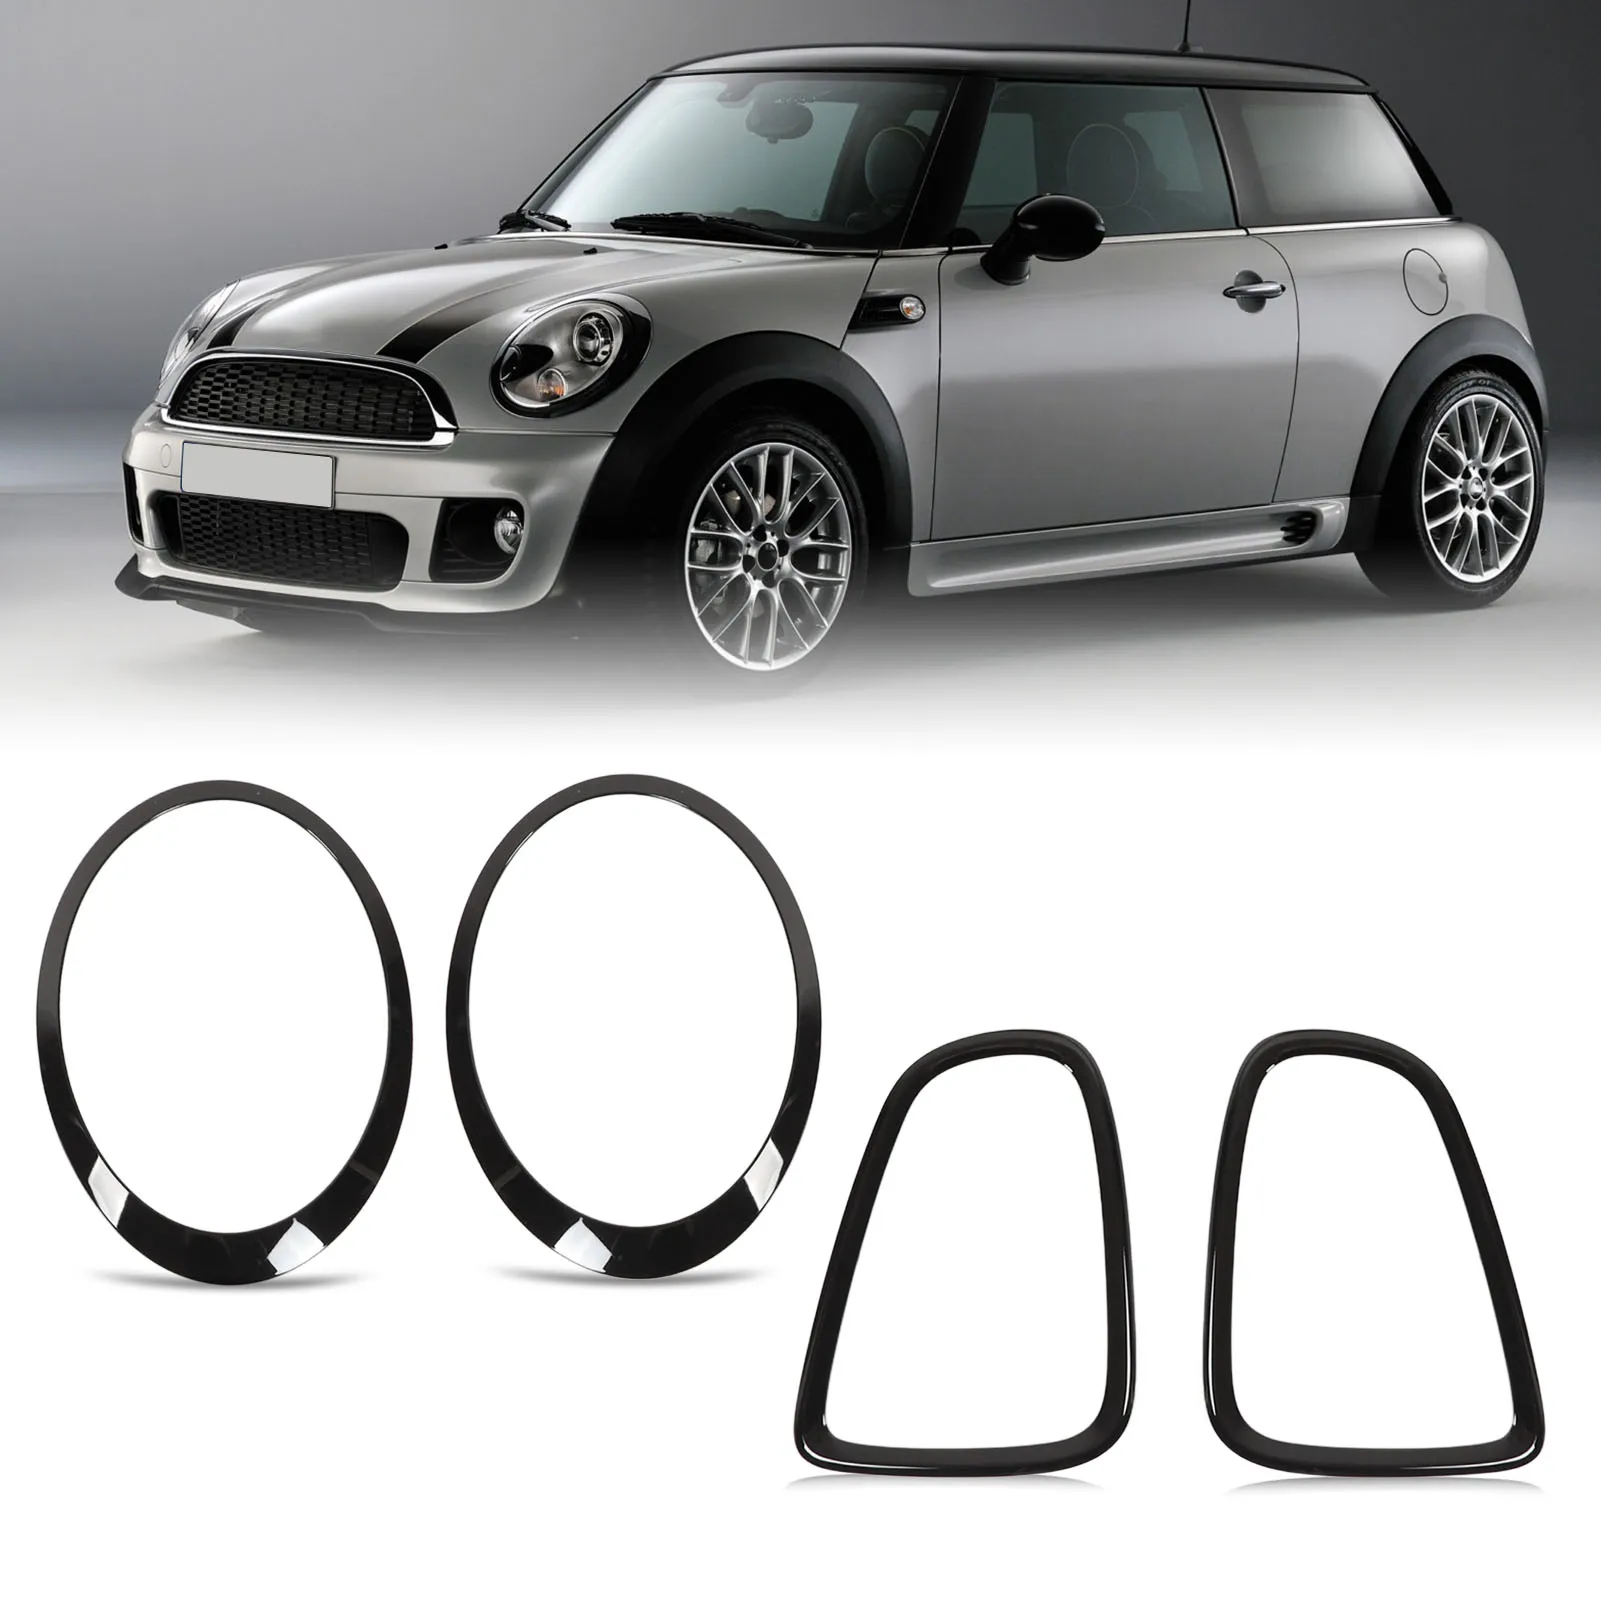 

4pcs Gloss Black Headlight Taillight Surround Cover Trims Replacement For Mini R56 R57 R58 R59 Cooper S JCW 2007‑2015